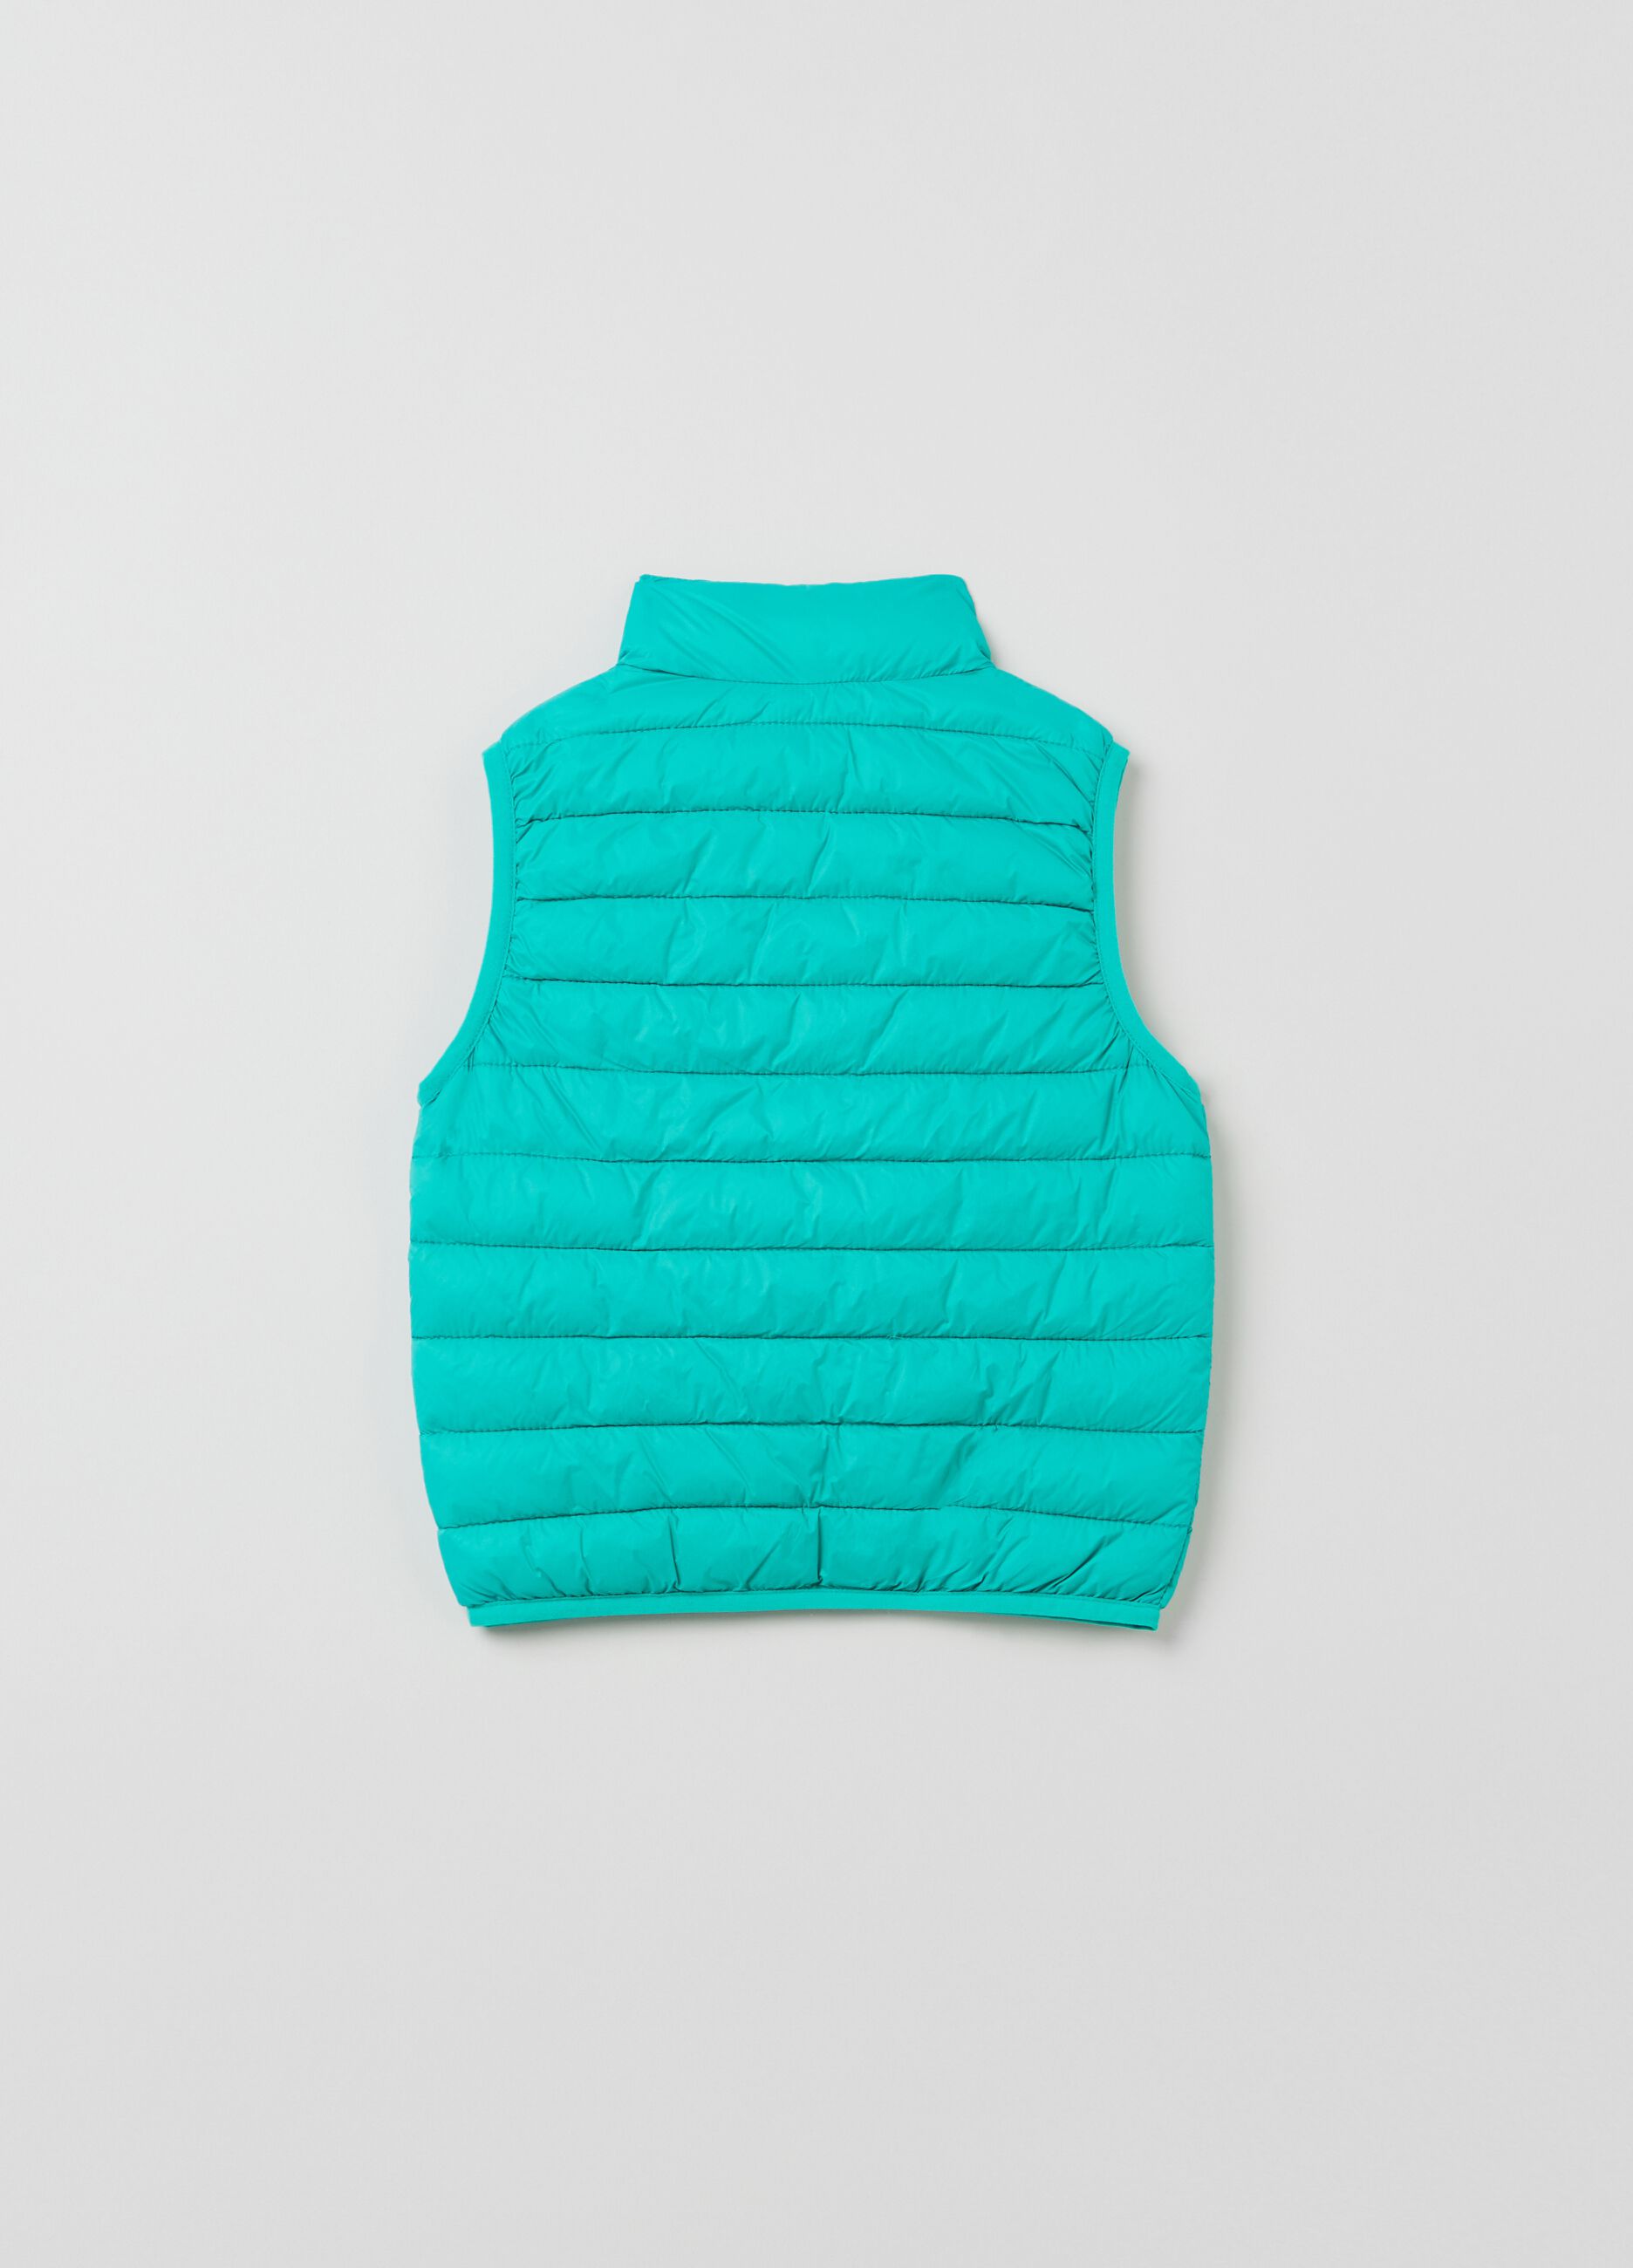 Ultralight down gilet with high neck